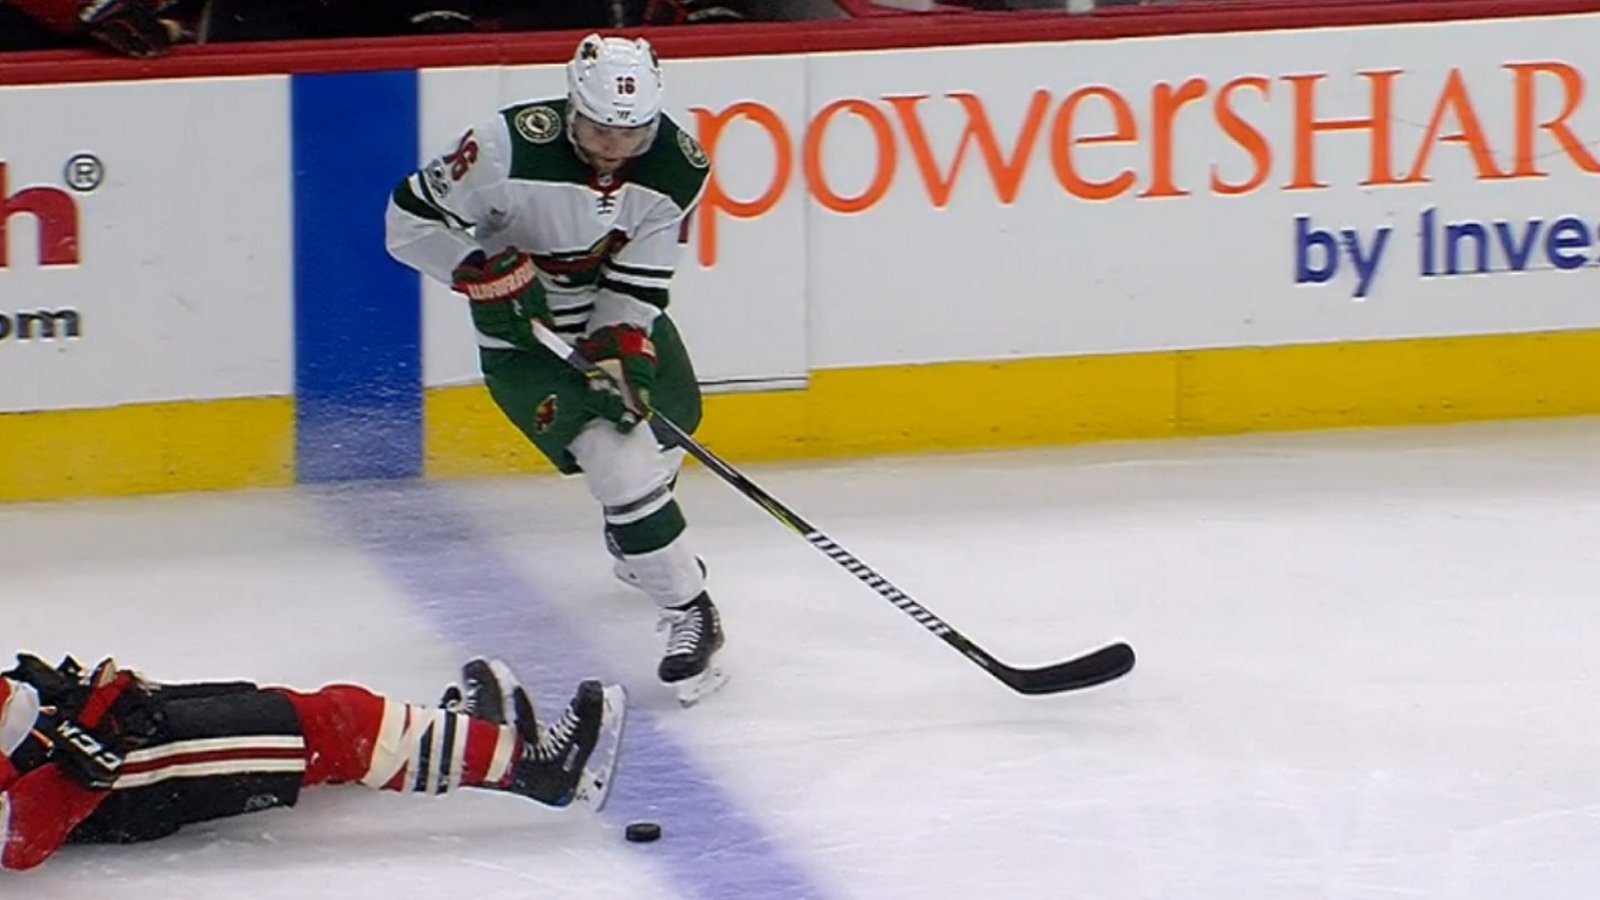 Major controversy after call from NHL officials leads to two goals and a penalty.